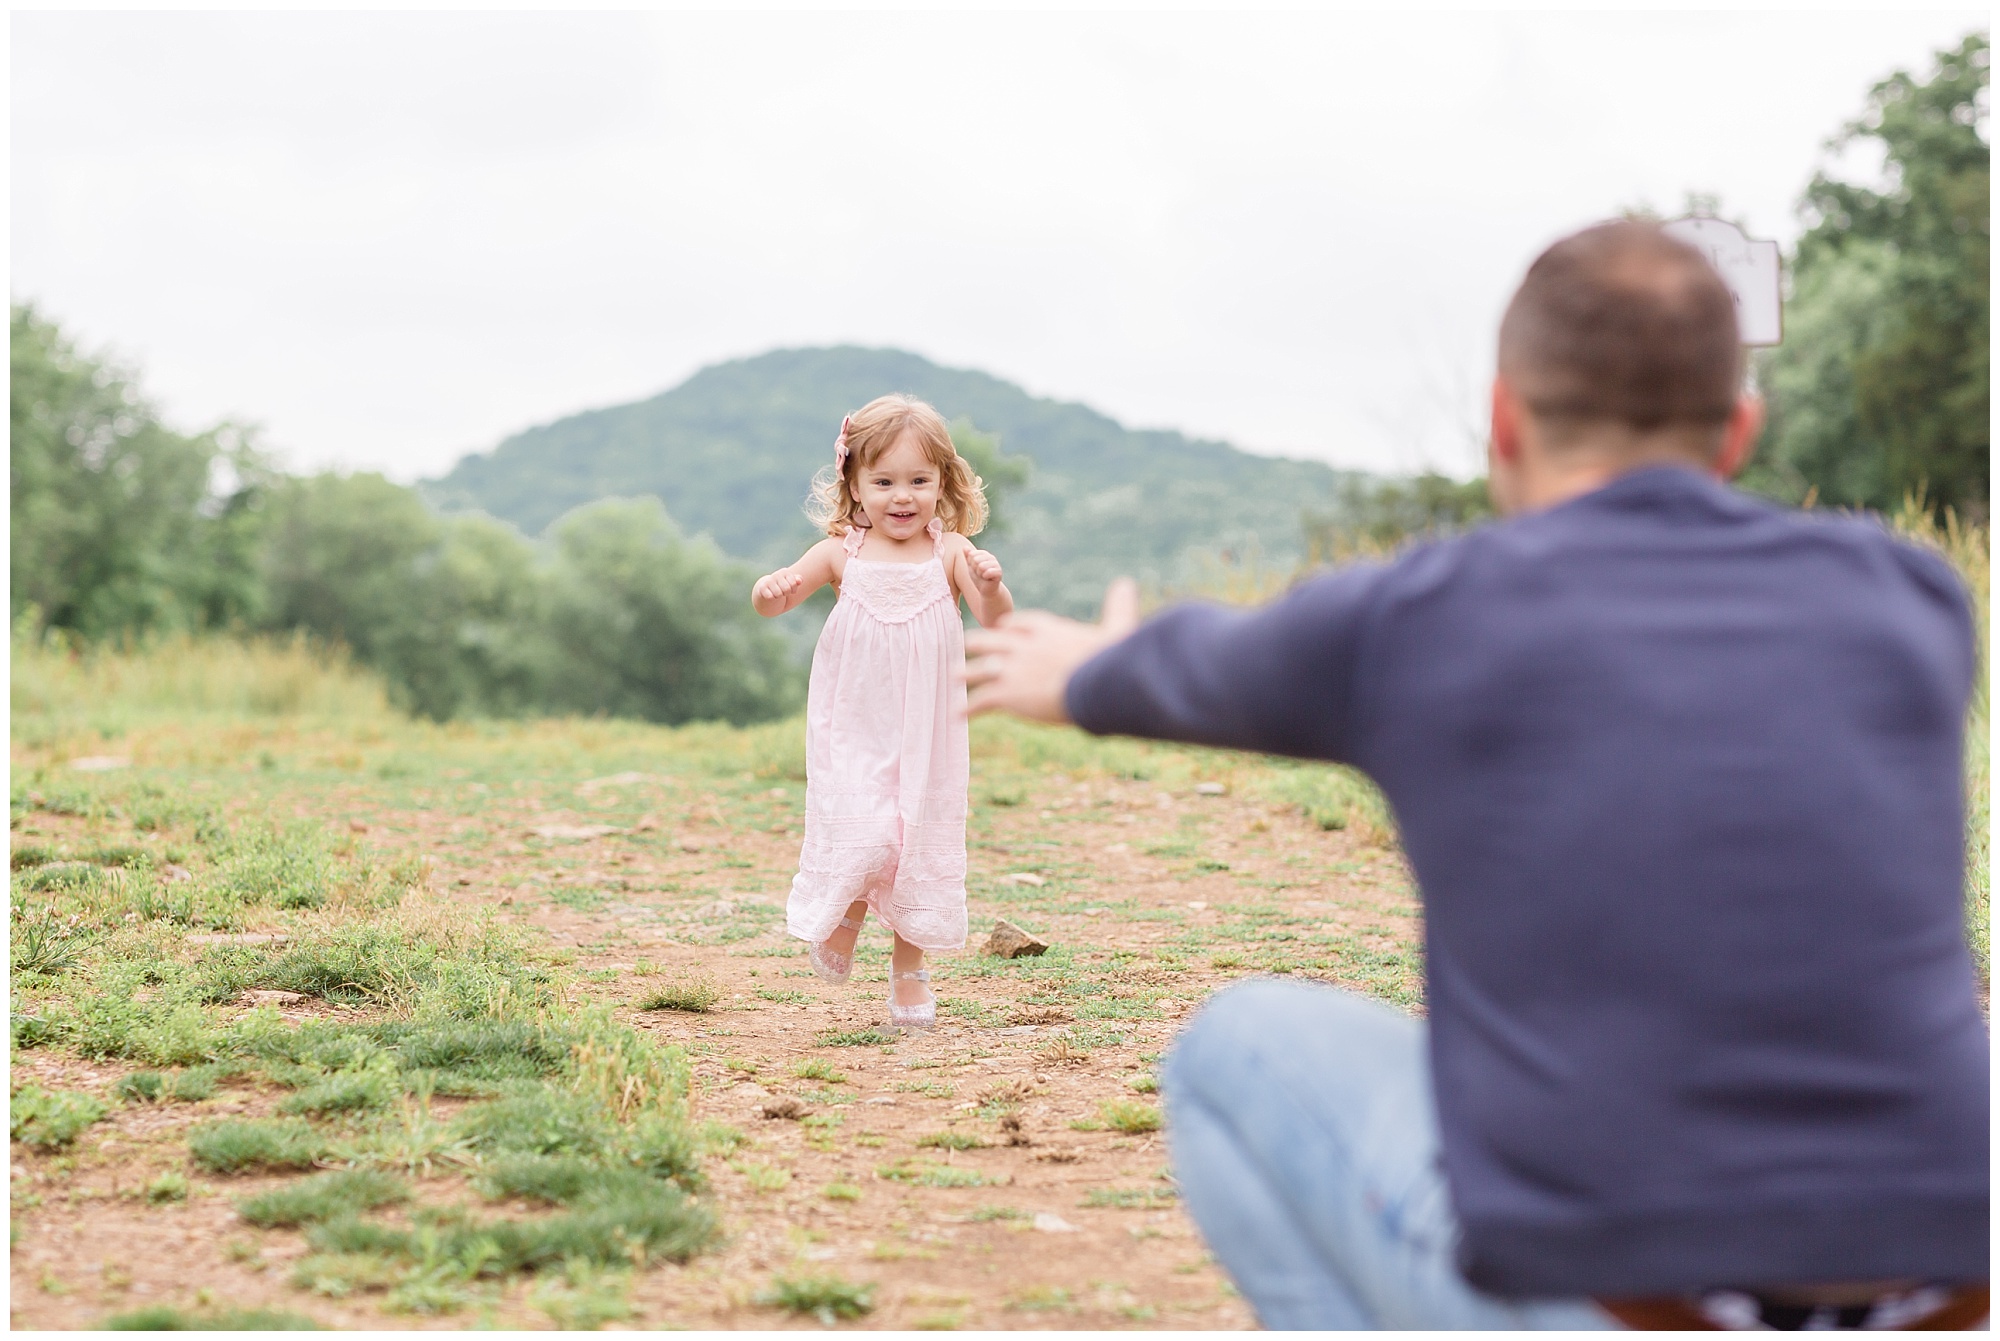 This sweet little girl is running to her daddy in this beautiful open area in Nashville, TN. Dad is wearing a long sleeve navy blue shirt and blue jeans. The daughter is wearing a light pink sleeveless dress and a matching pink bow. This session is featured on our monthly membership called "Behind the Lens". Make sure to check out the blog for more information!